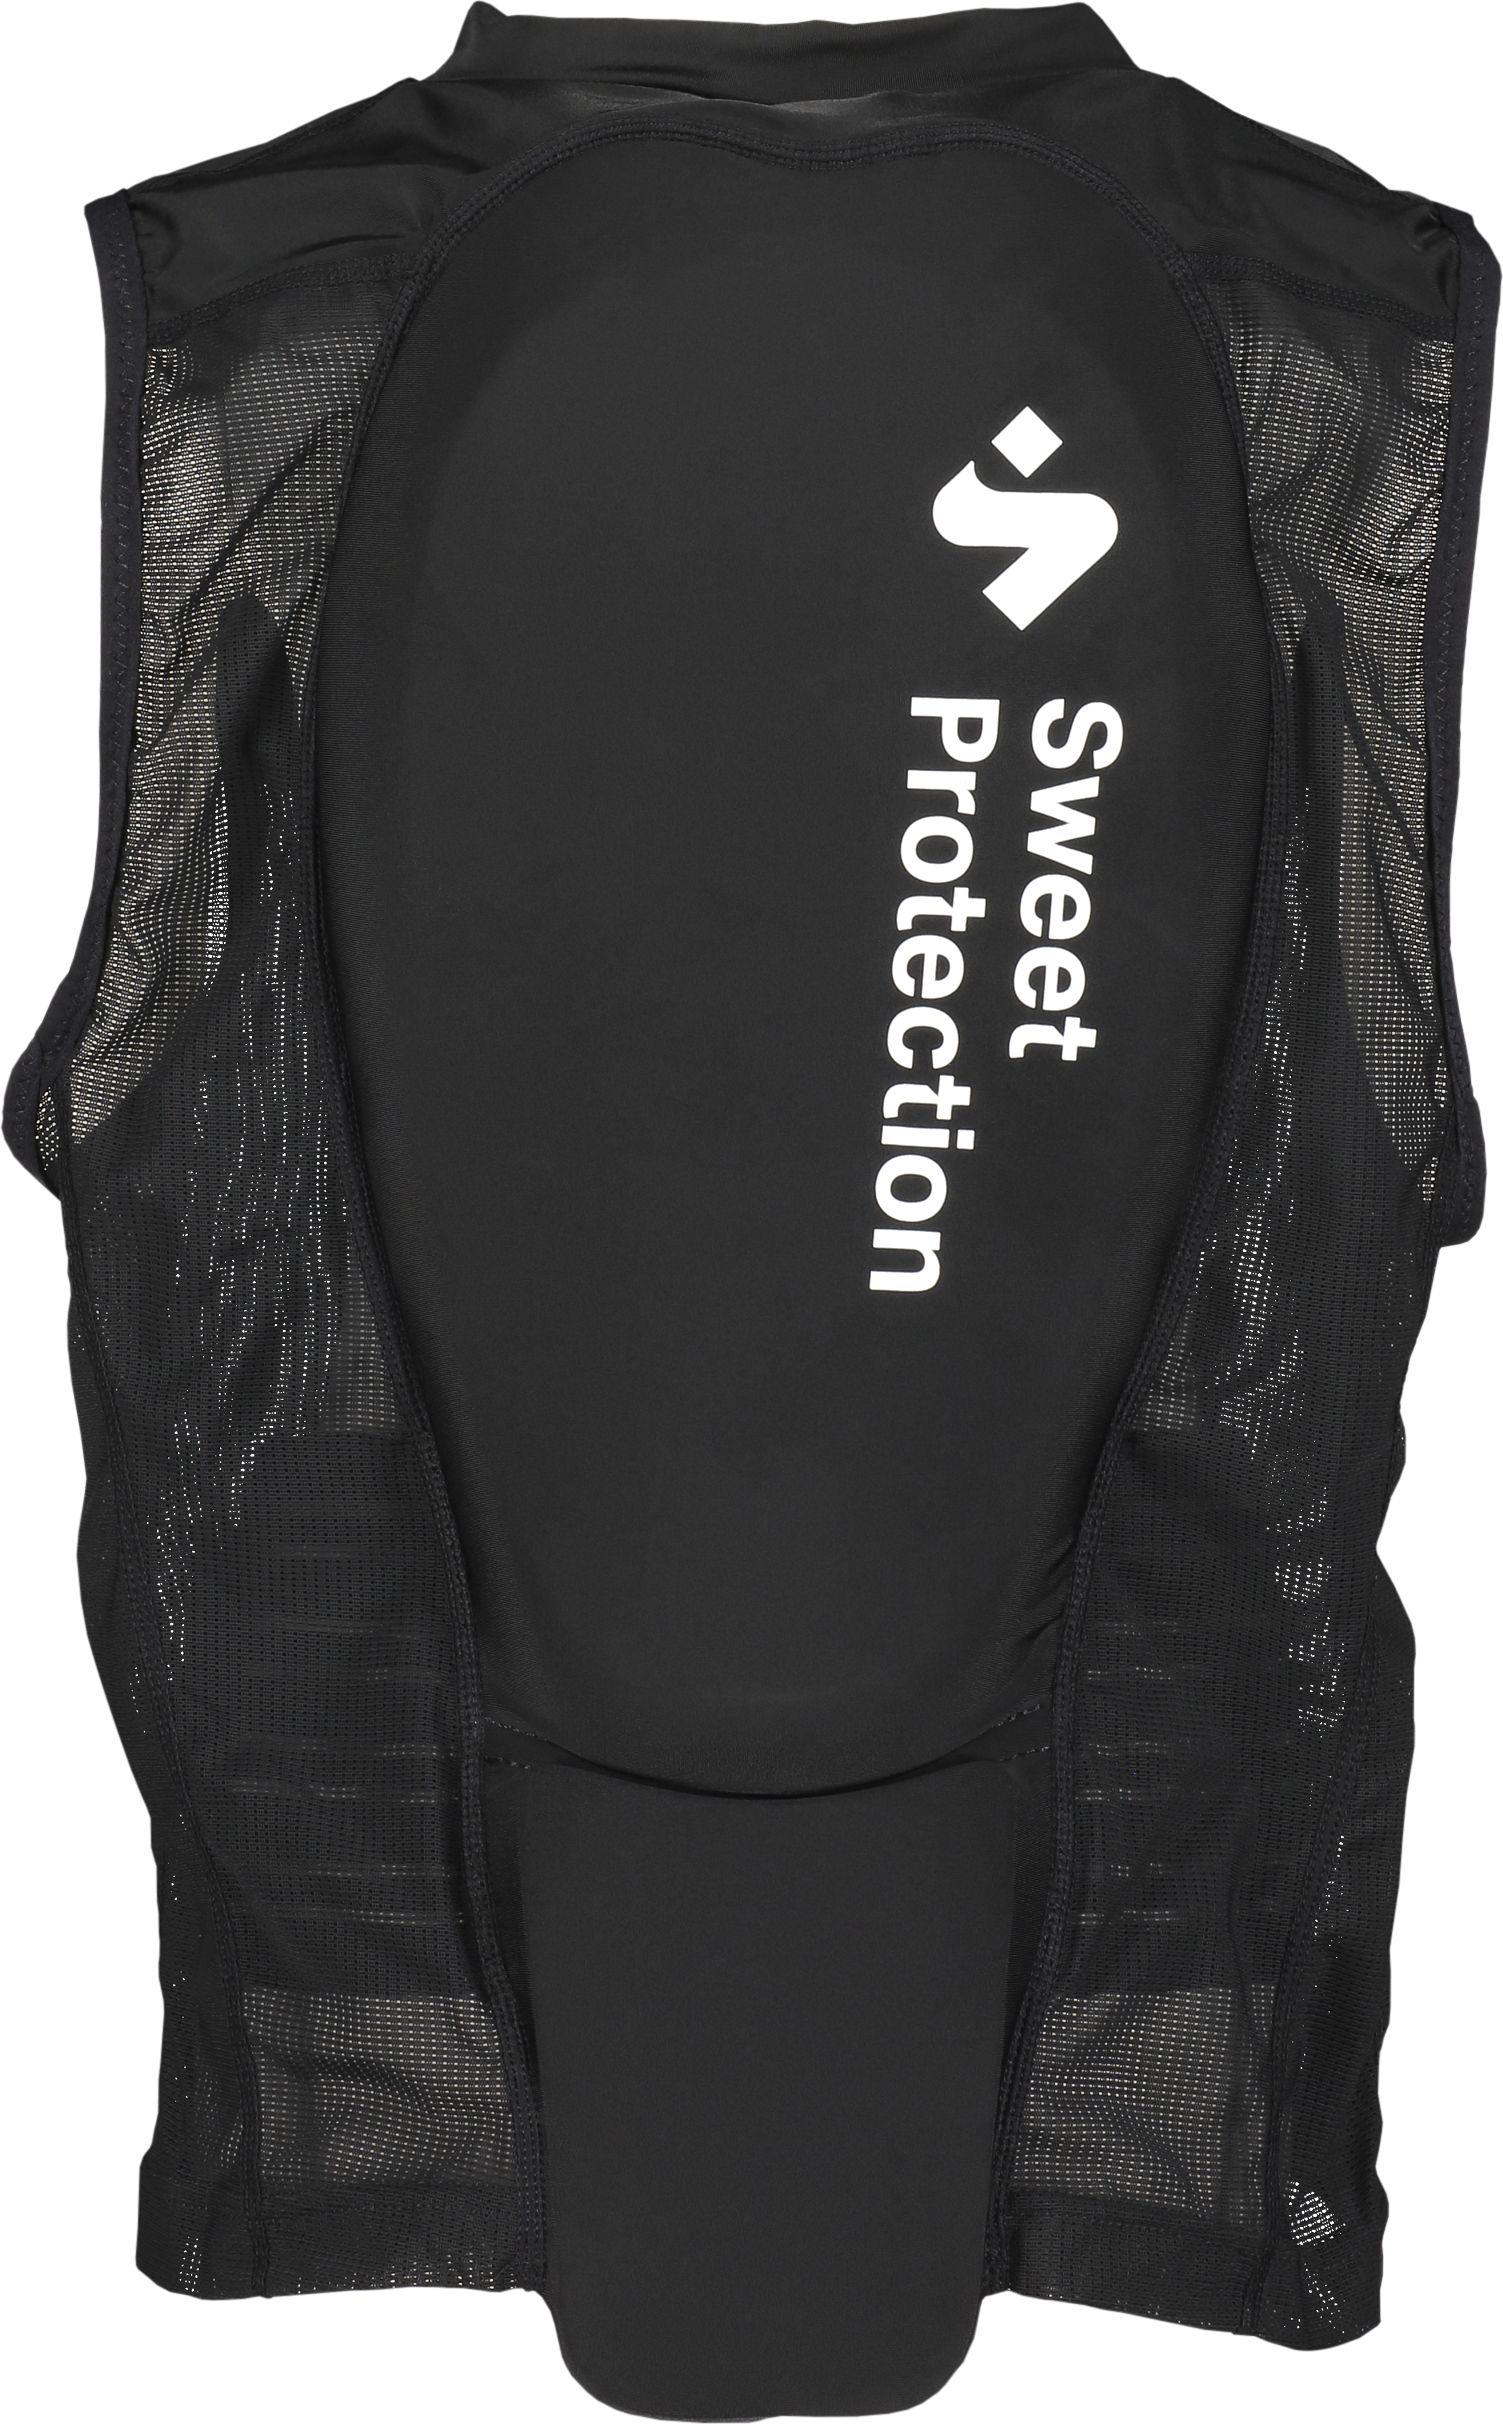 SWEET PROTECTION, M BACK PROTECTION VEST